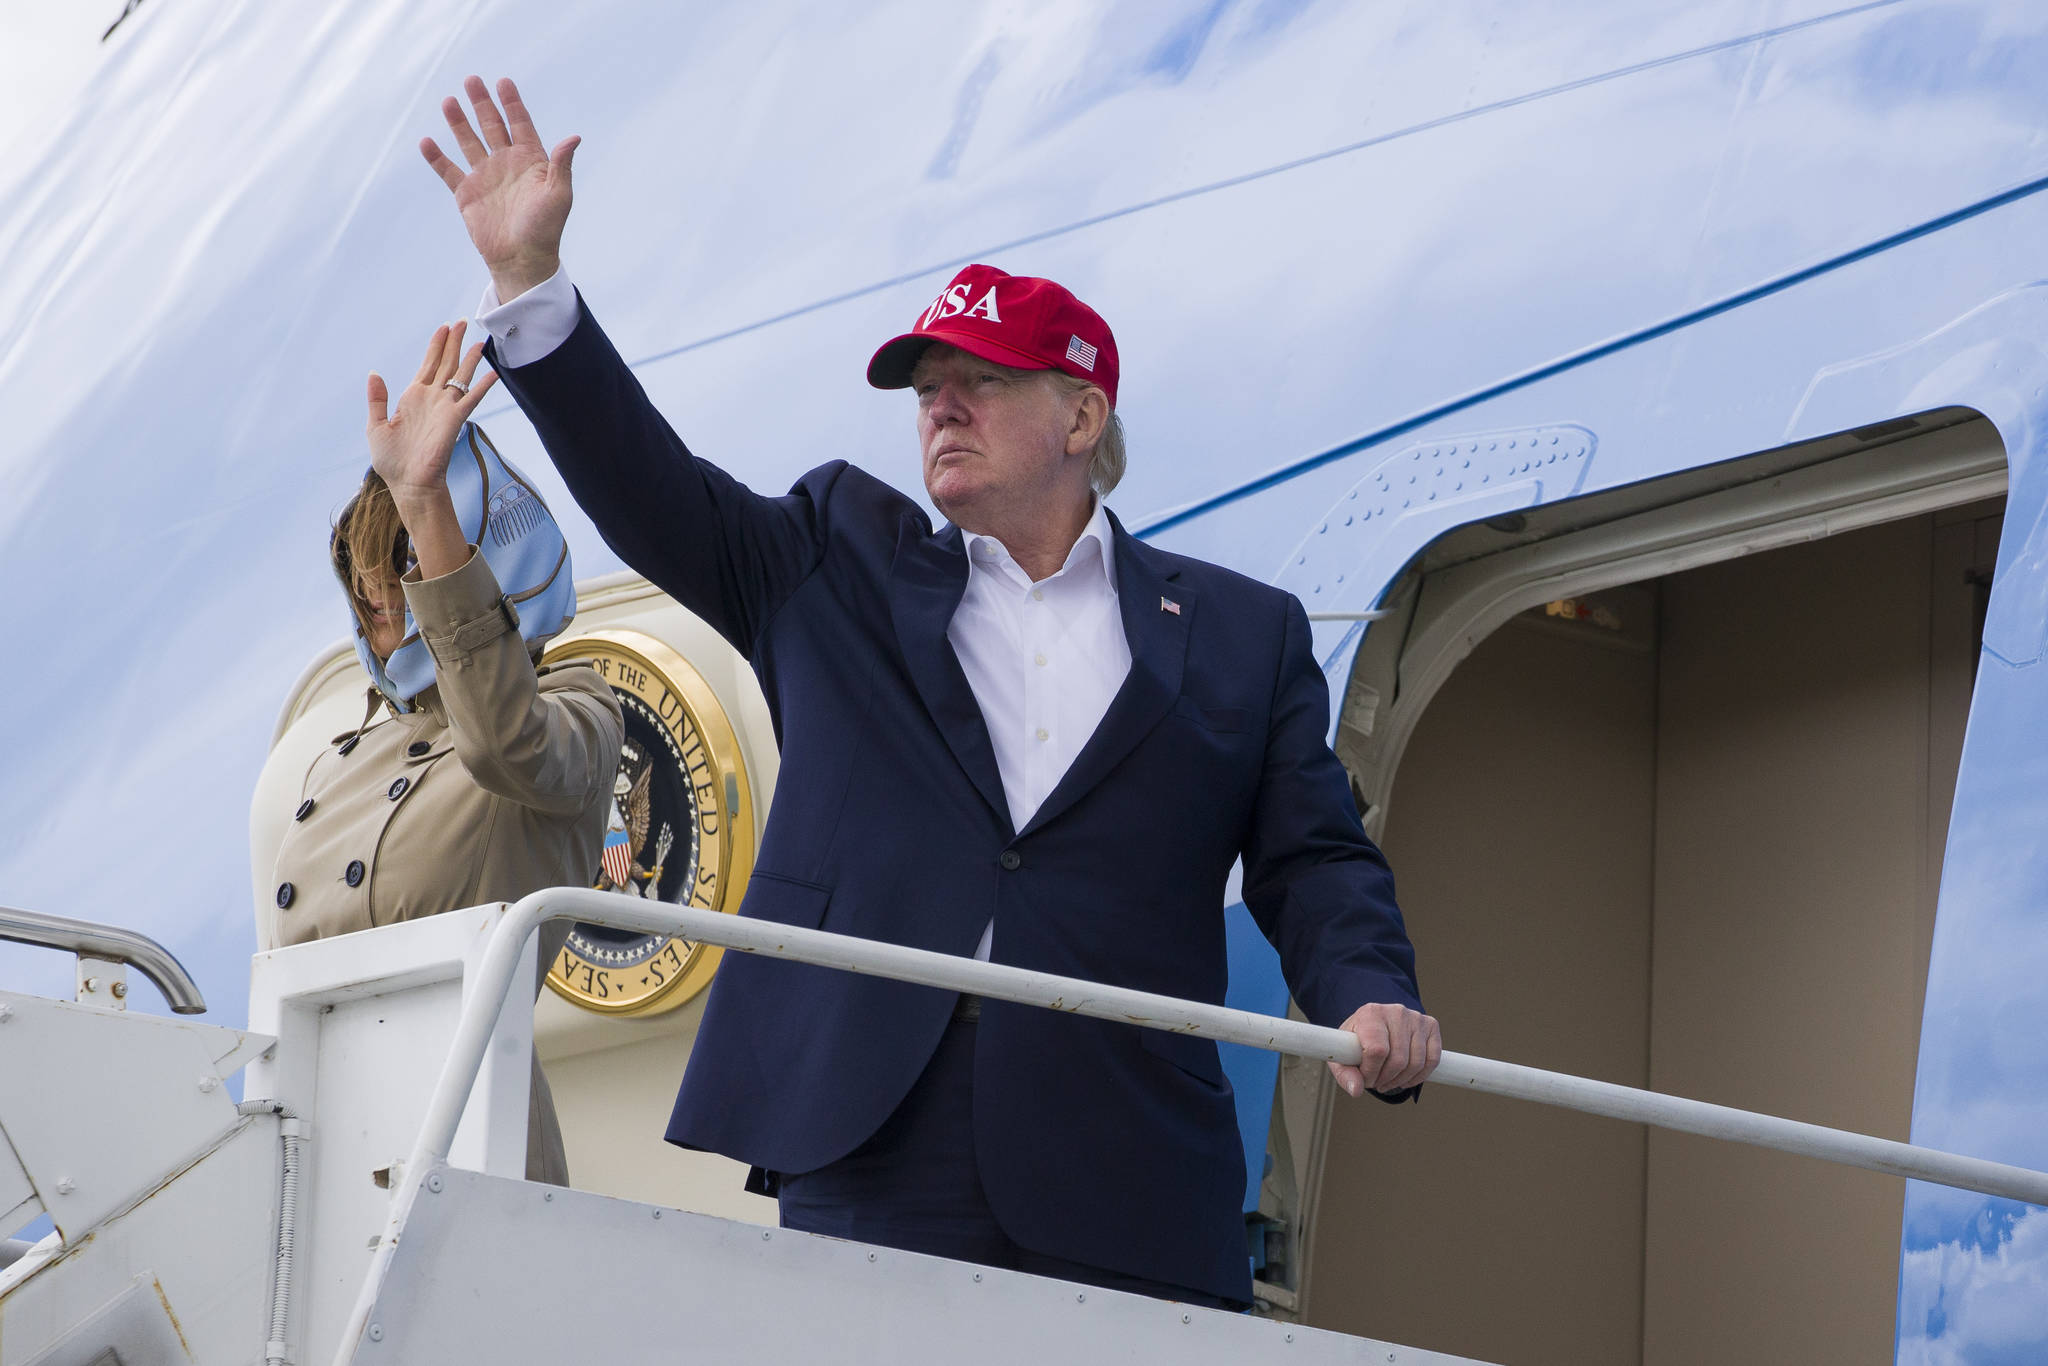 President Donald Trump, with first lady Melania Trump, waves as they depart Shannon Airport, Friday, June 7, 2019, in Shannon, Ireland. (AP Photo | Alex Brandon)